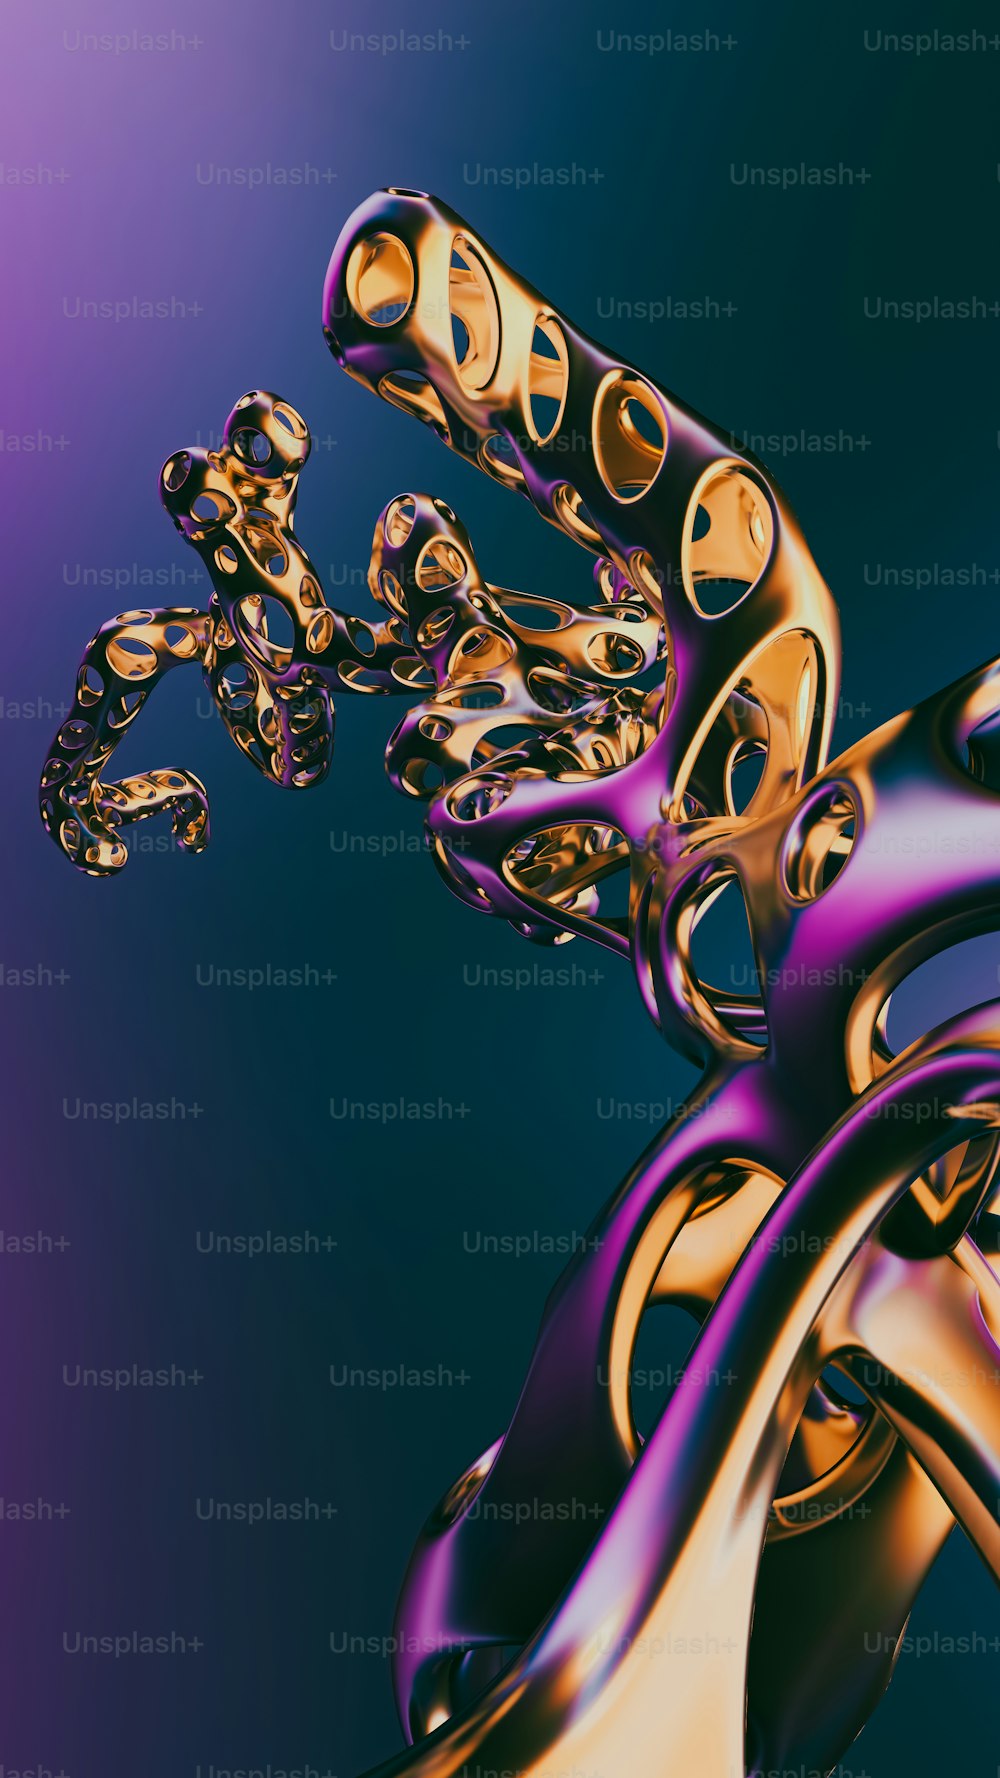 a computer generated image of a gold and purple object